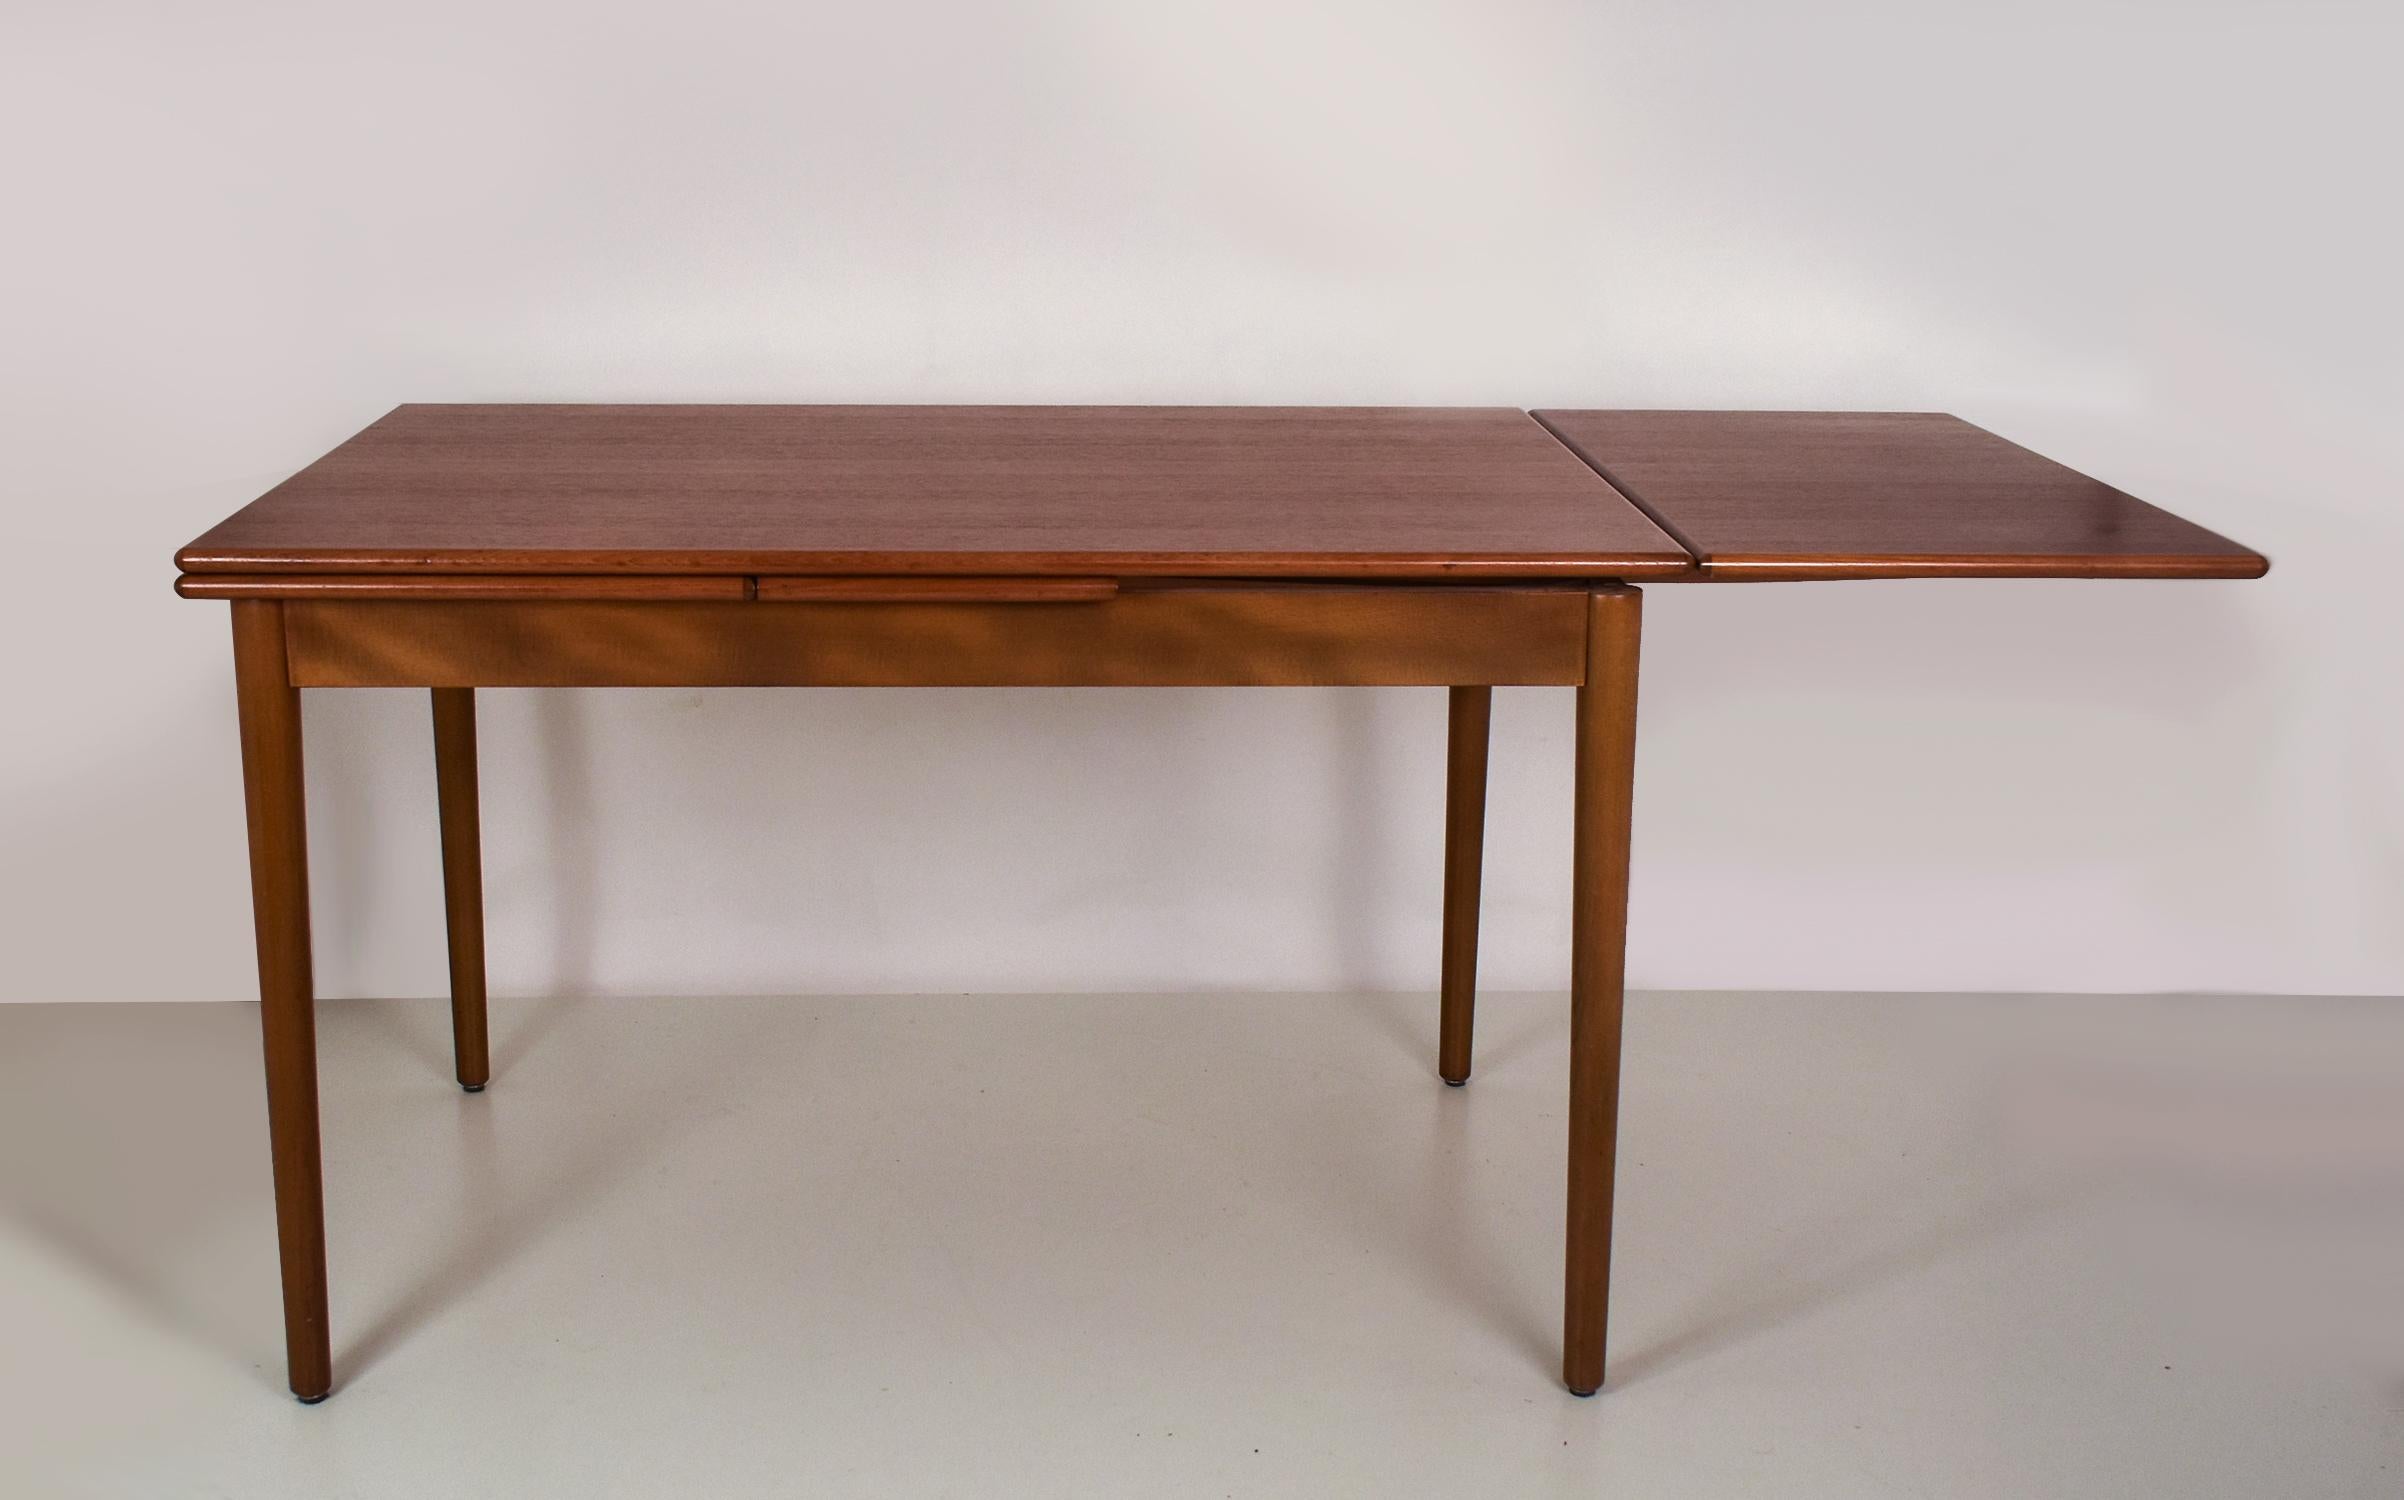 Danish modern draw leaf teak extending dining table  manufactured by AM Møbler , 1960's.
Functional and elegant table. One wing or both can be extended.
It is in very good condition.
Measures:
- closed: Width 120cm. Depth 80cm. Height 76cm.
- Open: